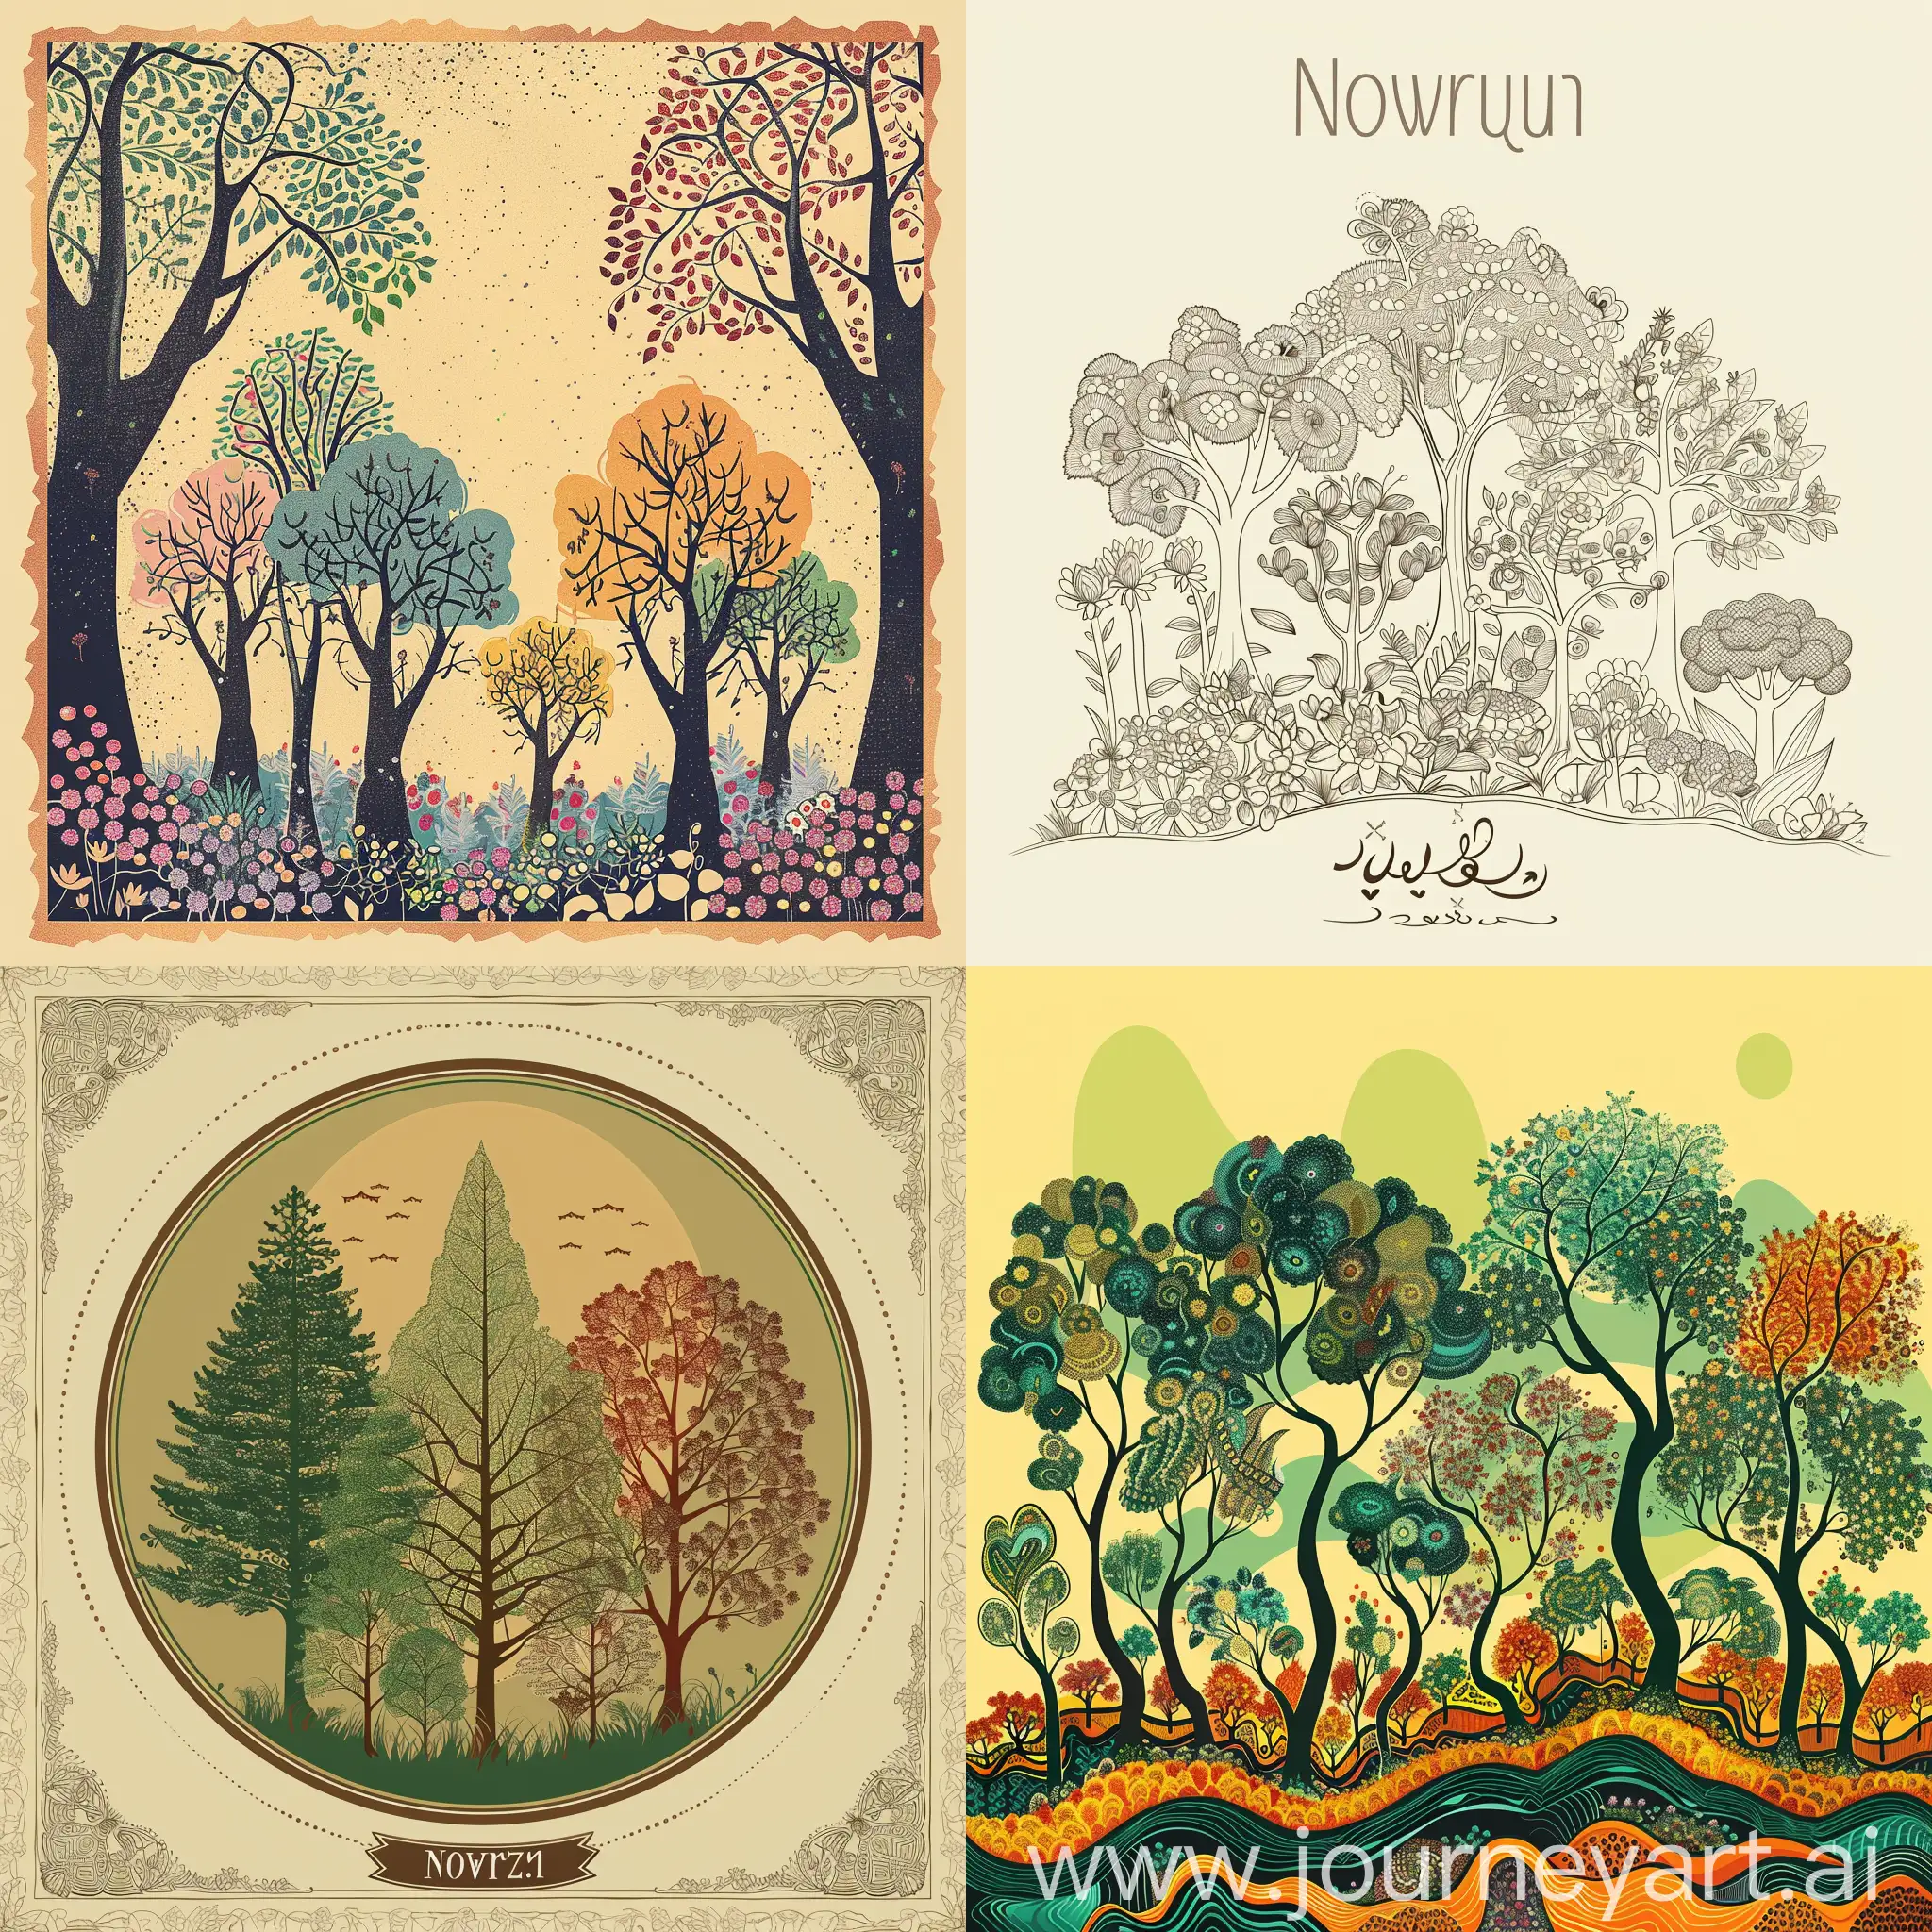 Iranian-Miniature-Style-Nowruz-Poster-with-Nature-and-Trees